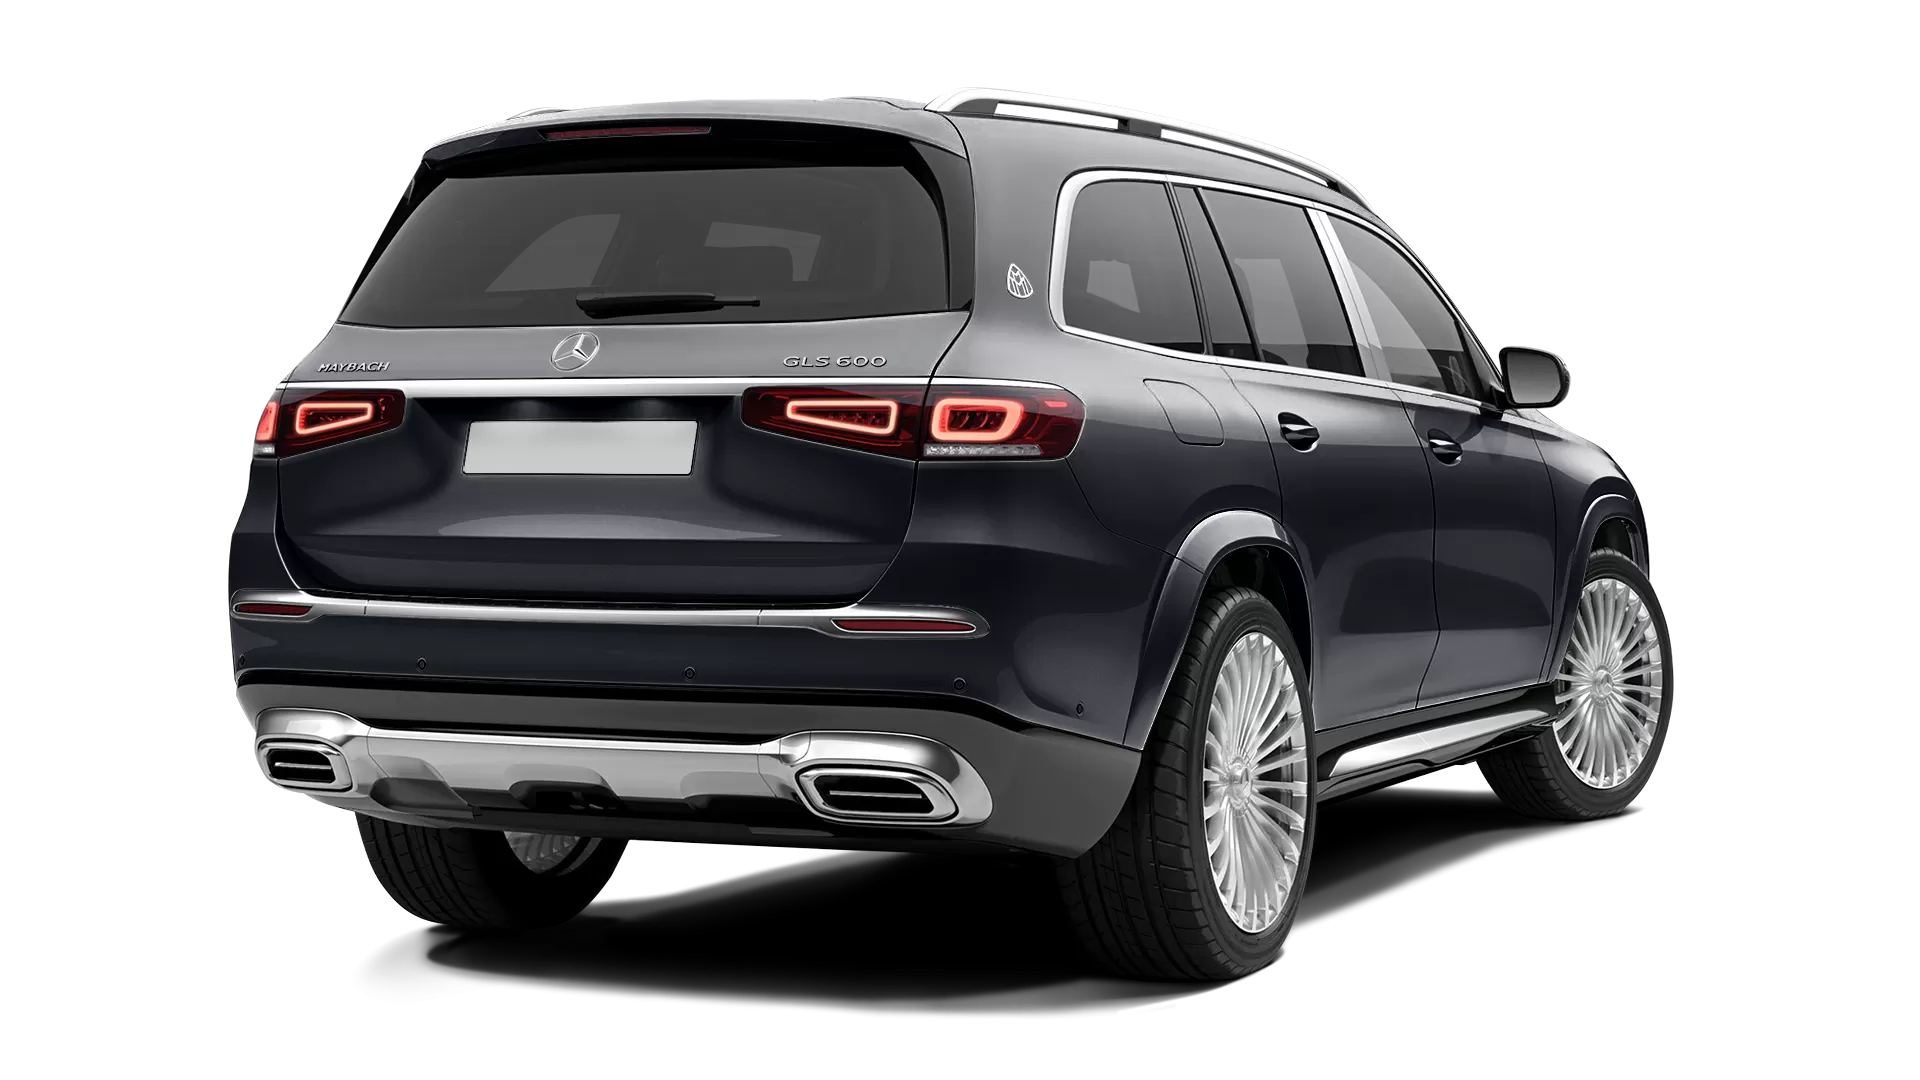 Mercedes Maybach GLS 600 stock rear view in Obsidian Black color